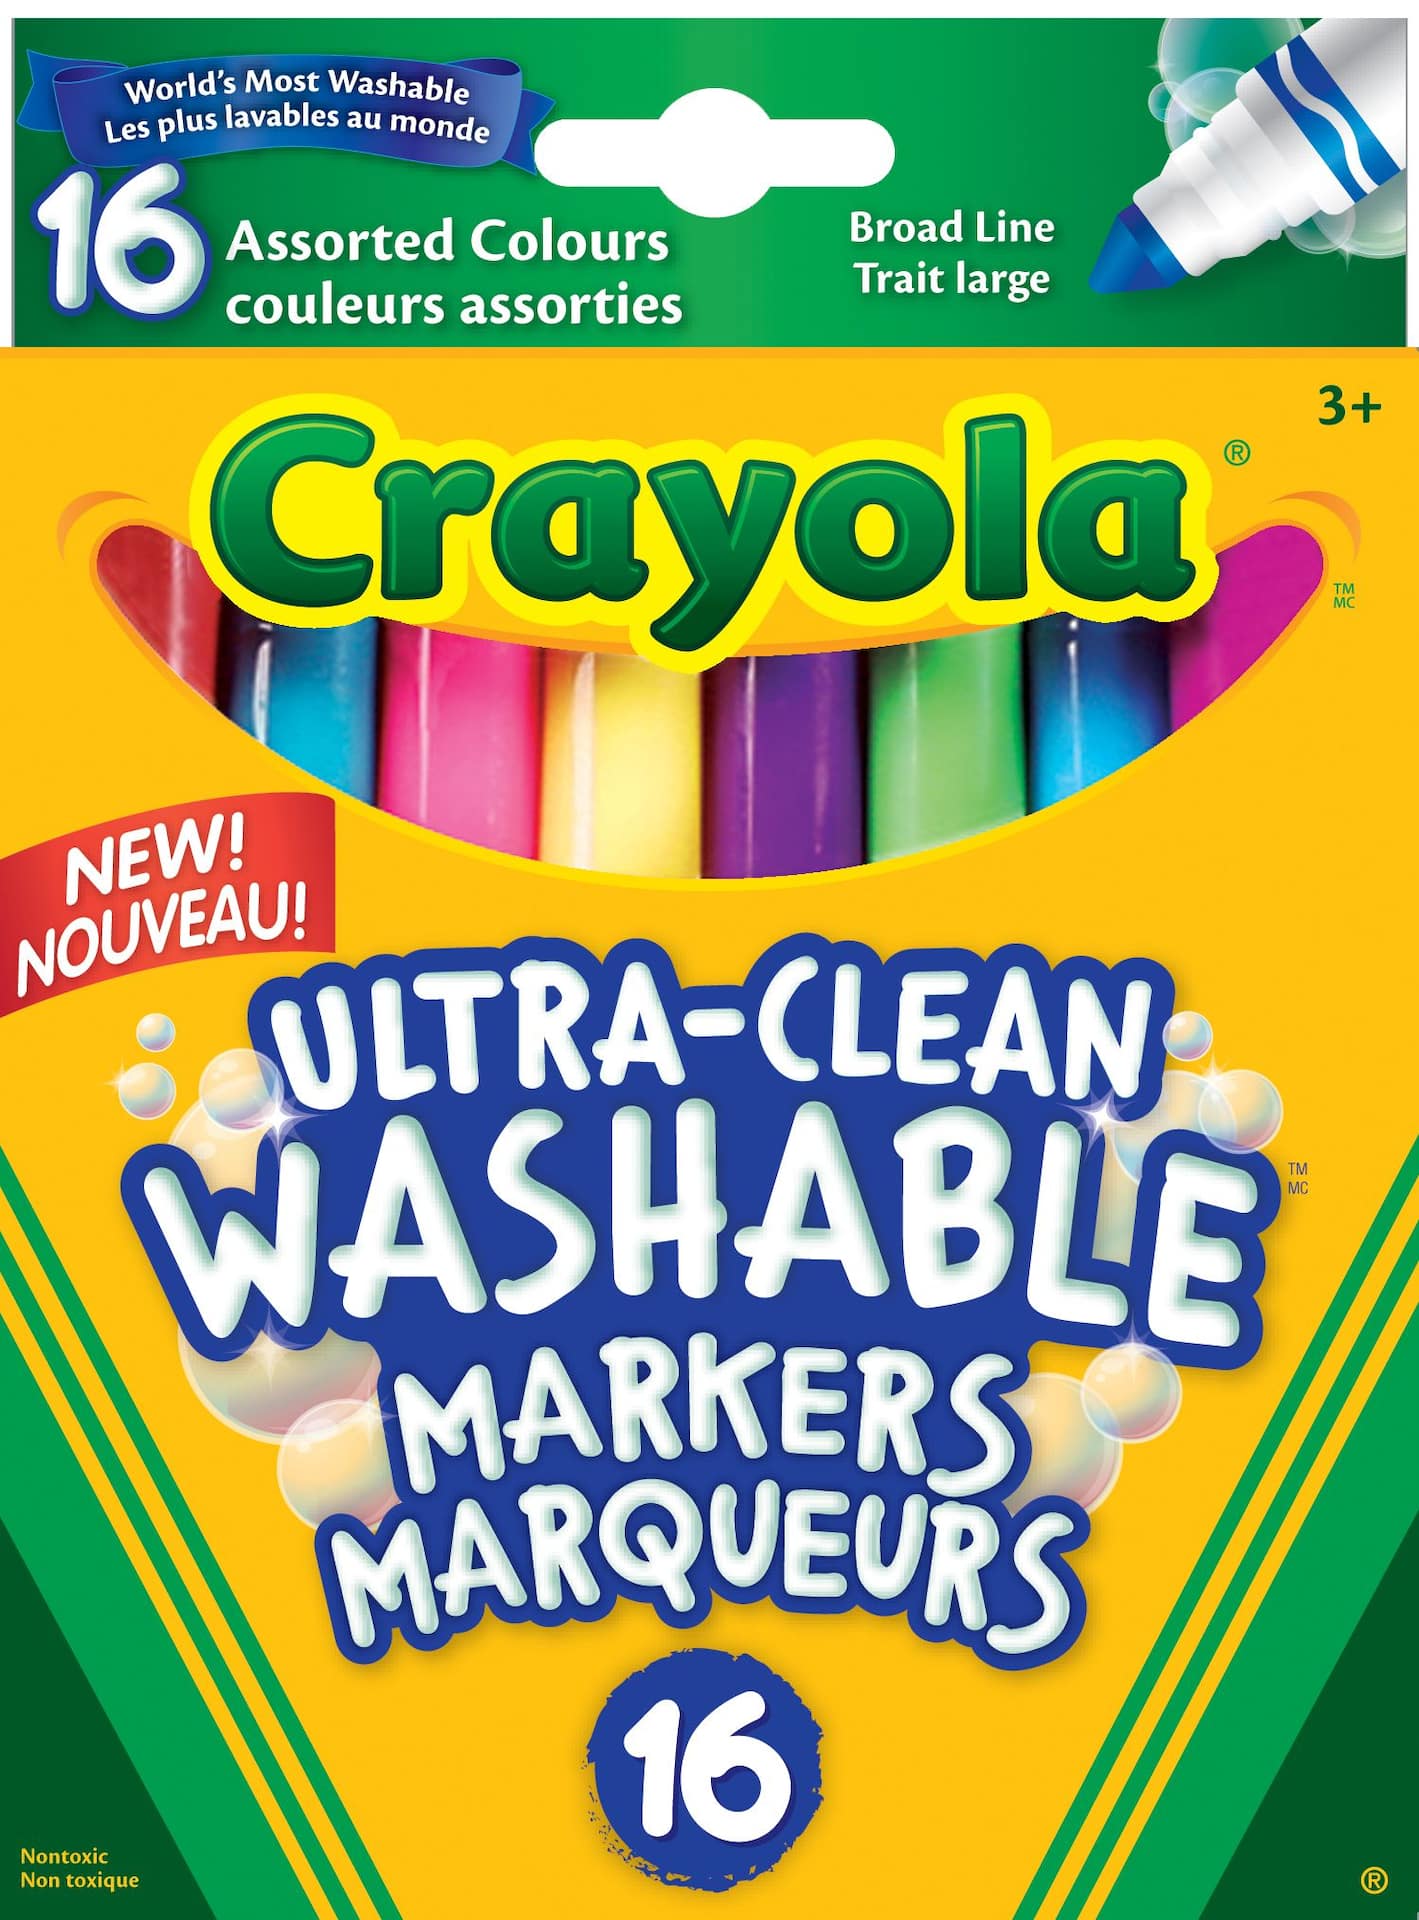 https://media-www.canadiantire.ca/product/seasonal-gardening/toys/home-office-supplies/1420815/crayola-markers-16-count-0a4f2a1d-c3b4-4327-adb5-de291584ee3b-jpgrendition.jpg